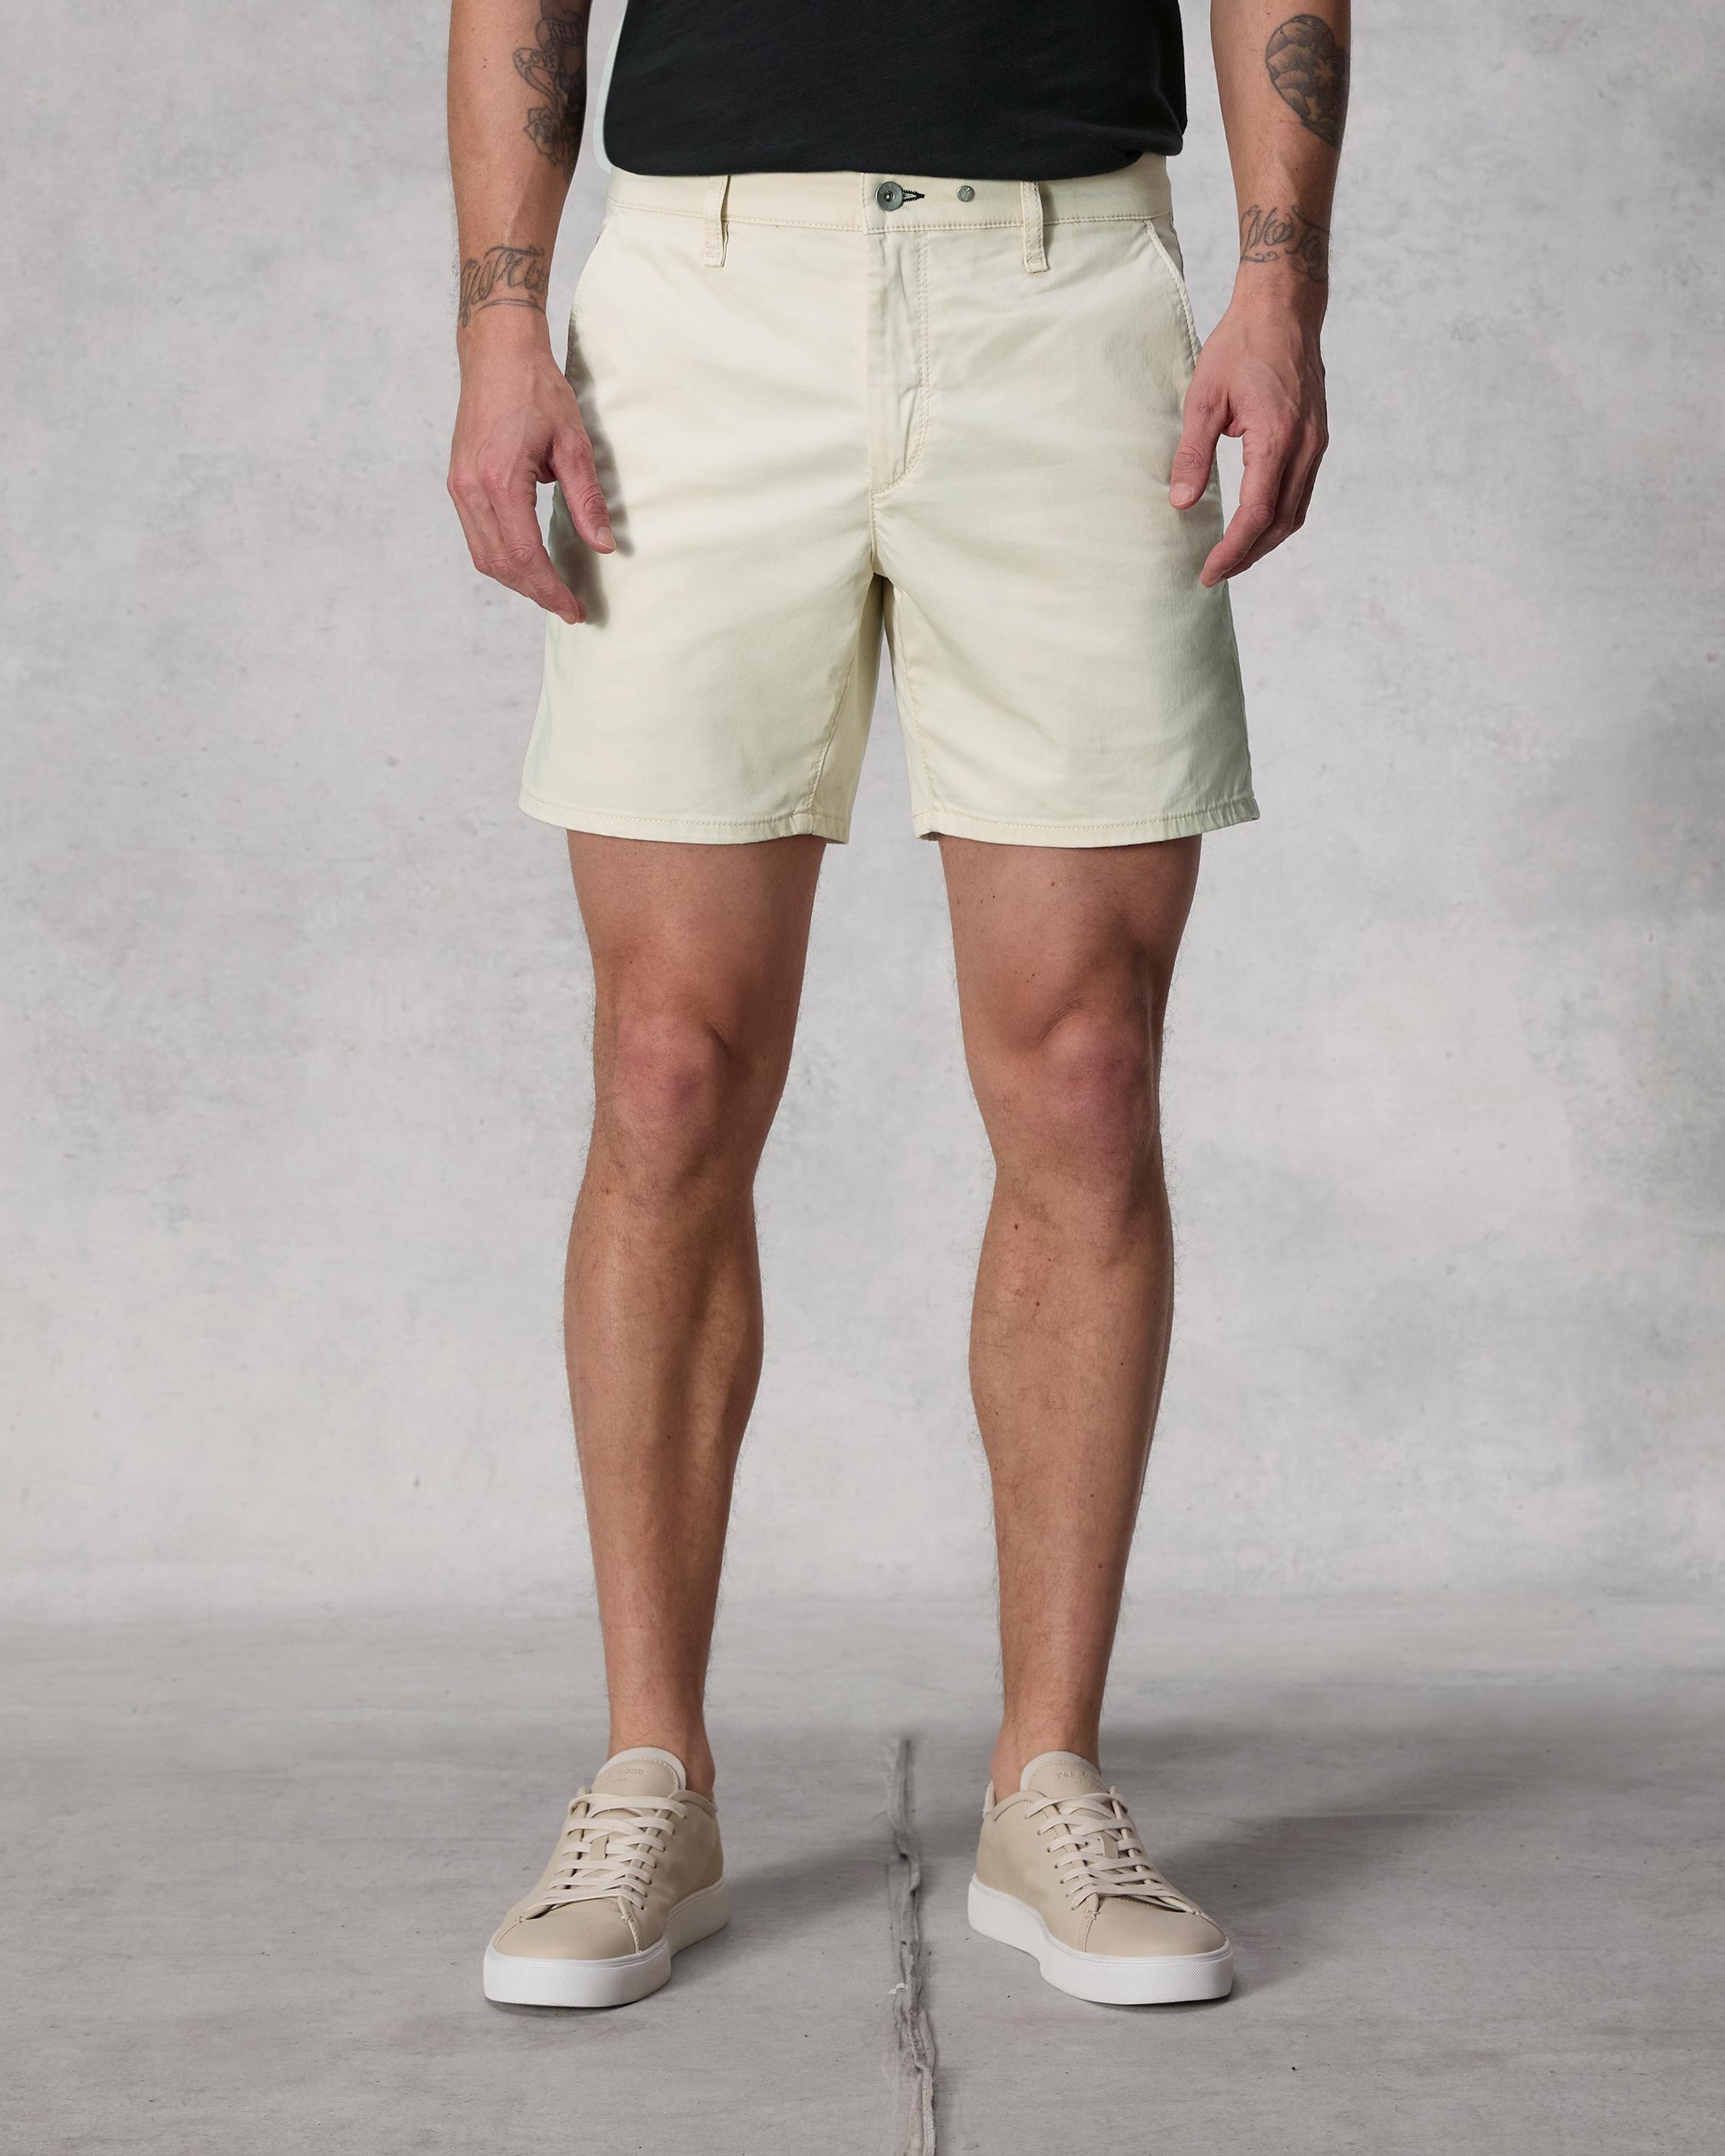 Standard Cotton Chino Short
Classic Fit - 5